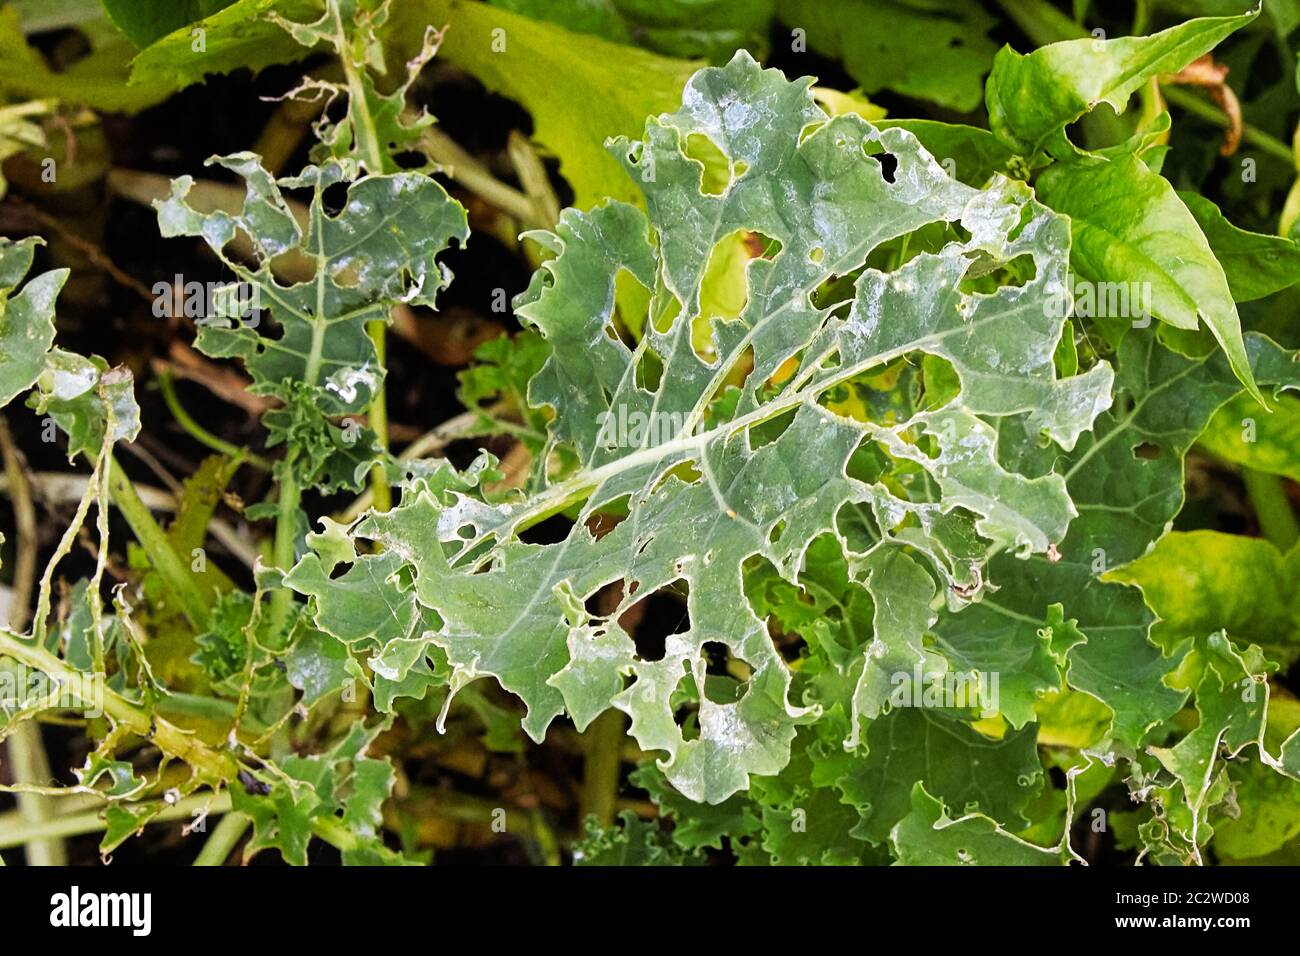 A kale leaf covered in holes caused by insects. Stock Photo